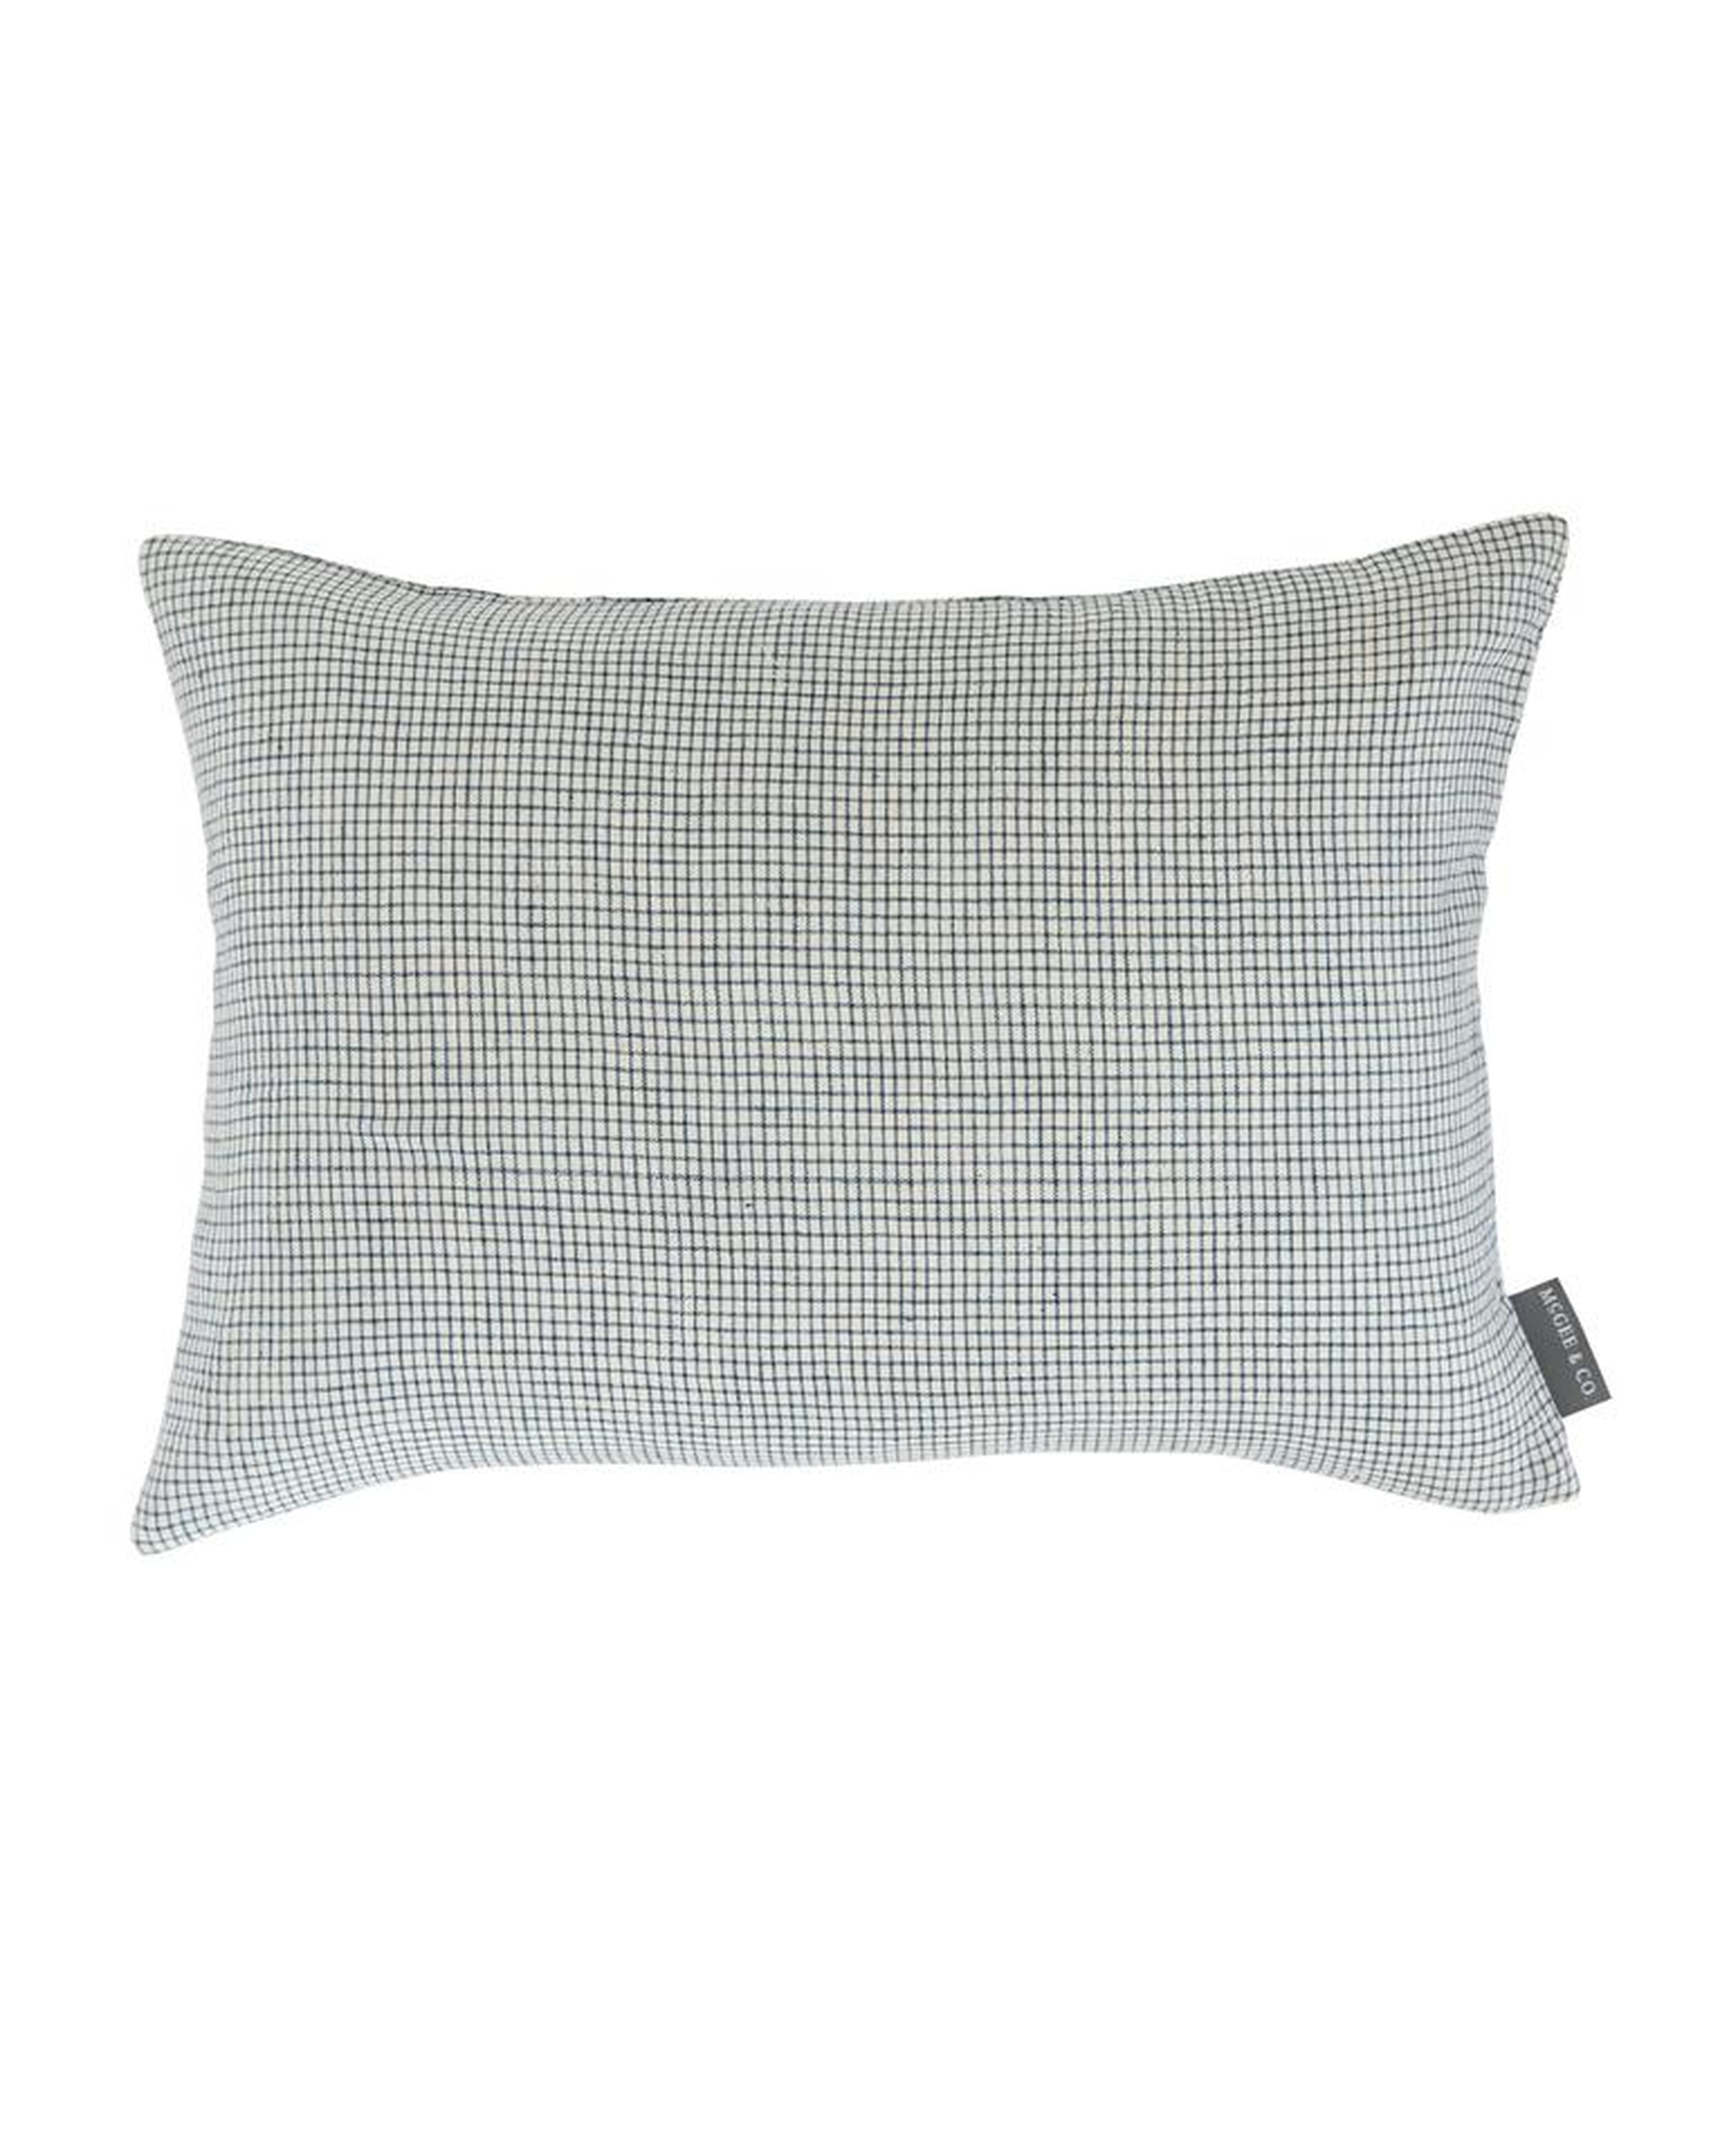 Luther Pillow Cover, White & Blue, 20" x 14" - McGee & Co.